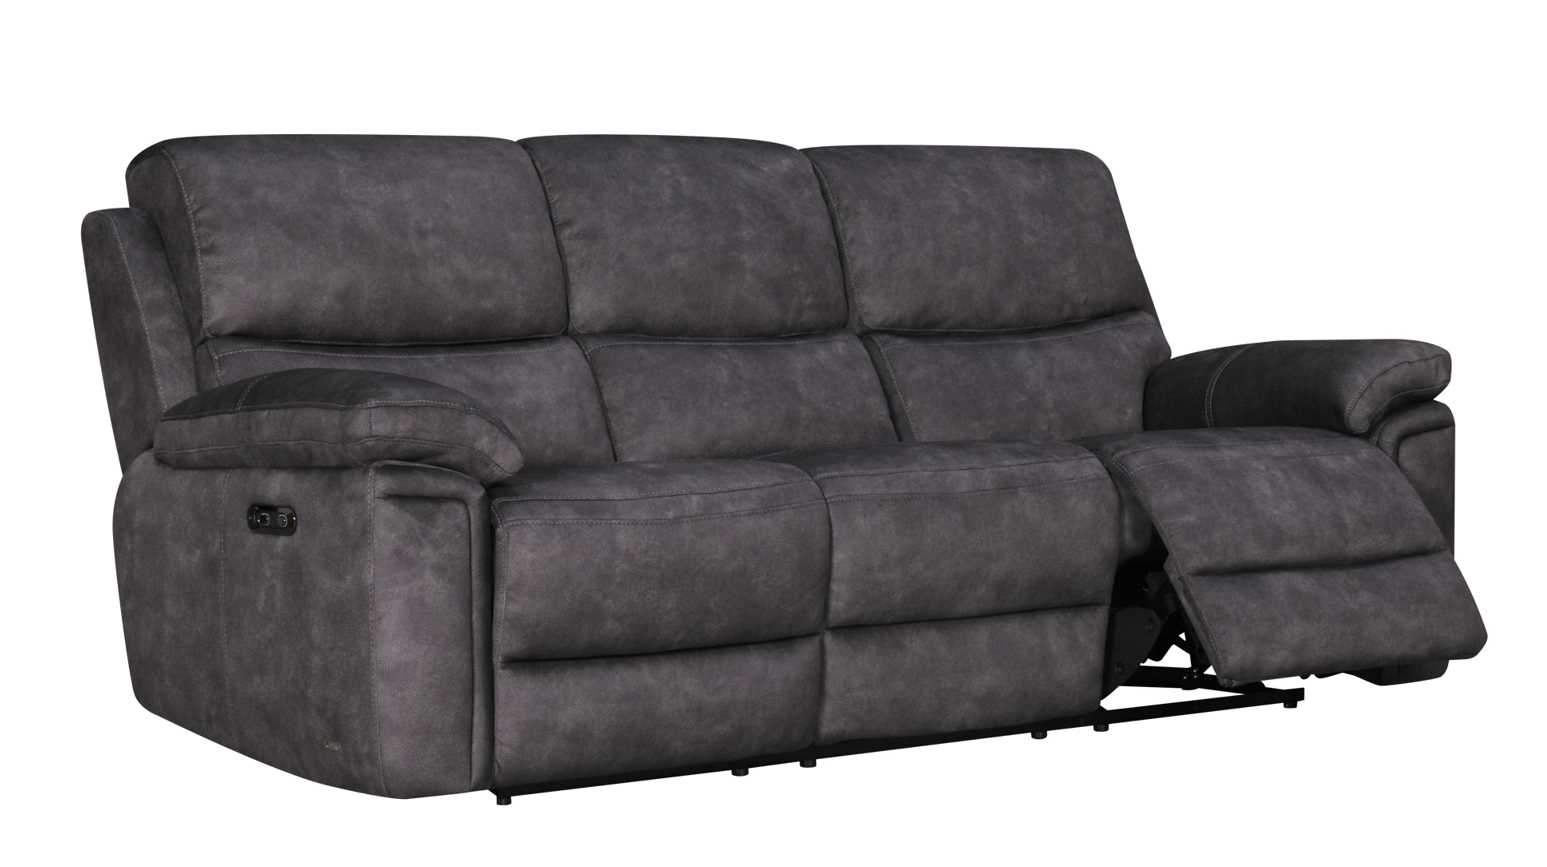 Relaxation Refined Exploring the Comfort of Reclining Chesterfield Furniture  %Post Title